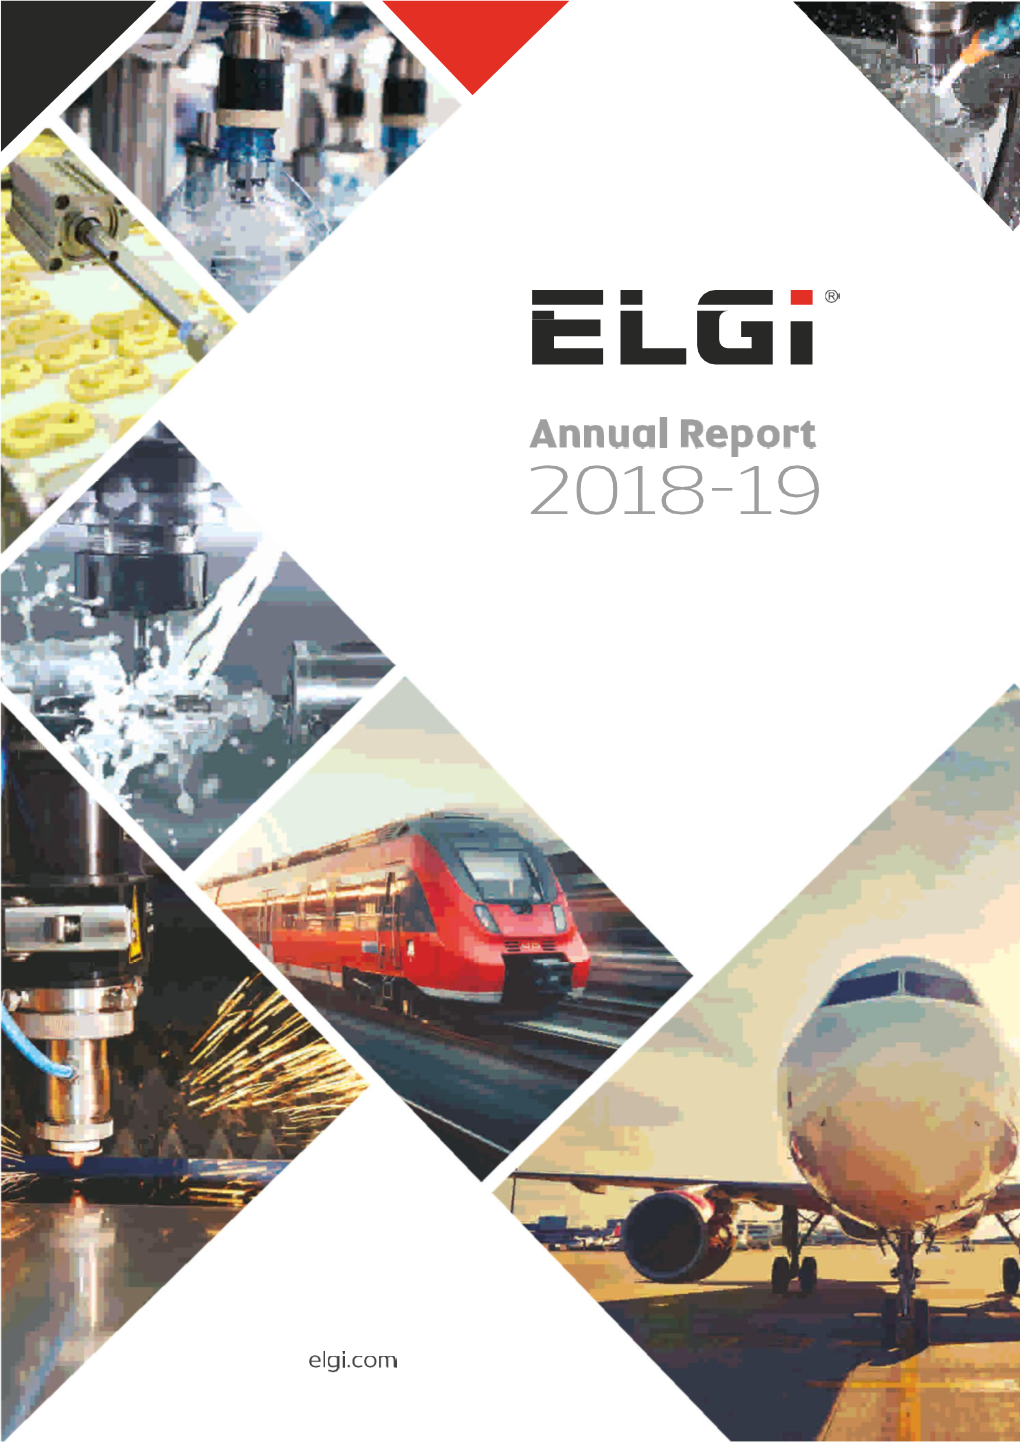 Annual Report 2018-19 Elgi Equipments Limited